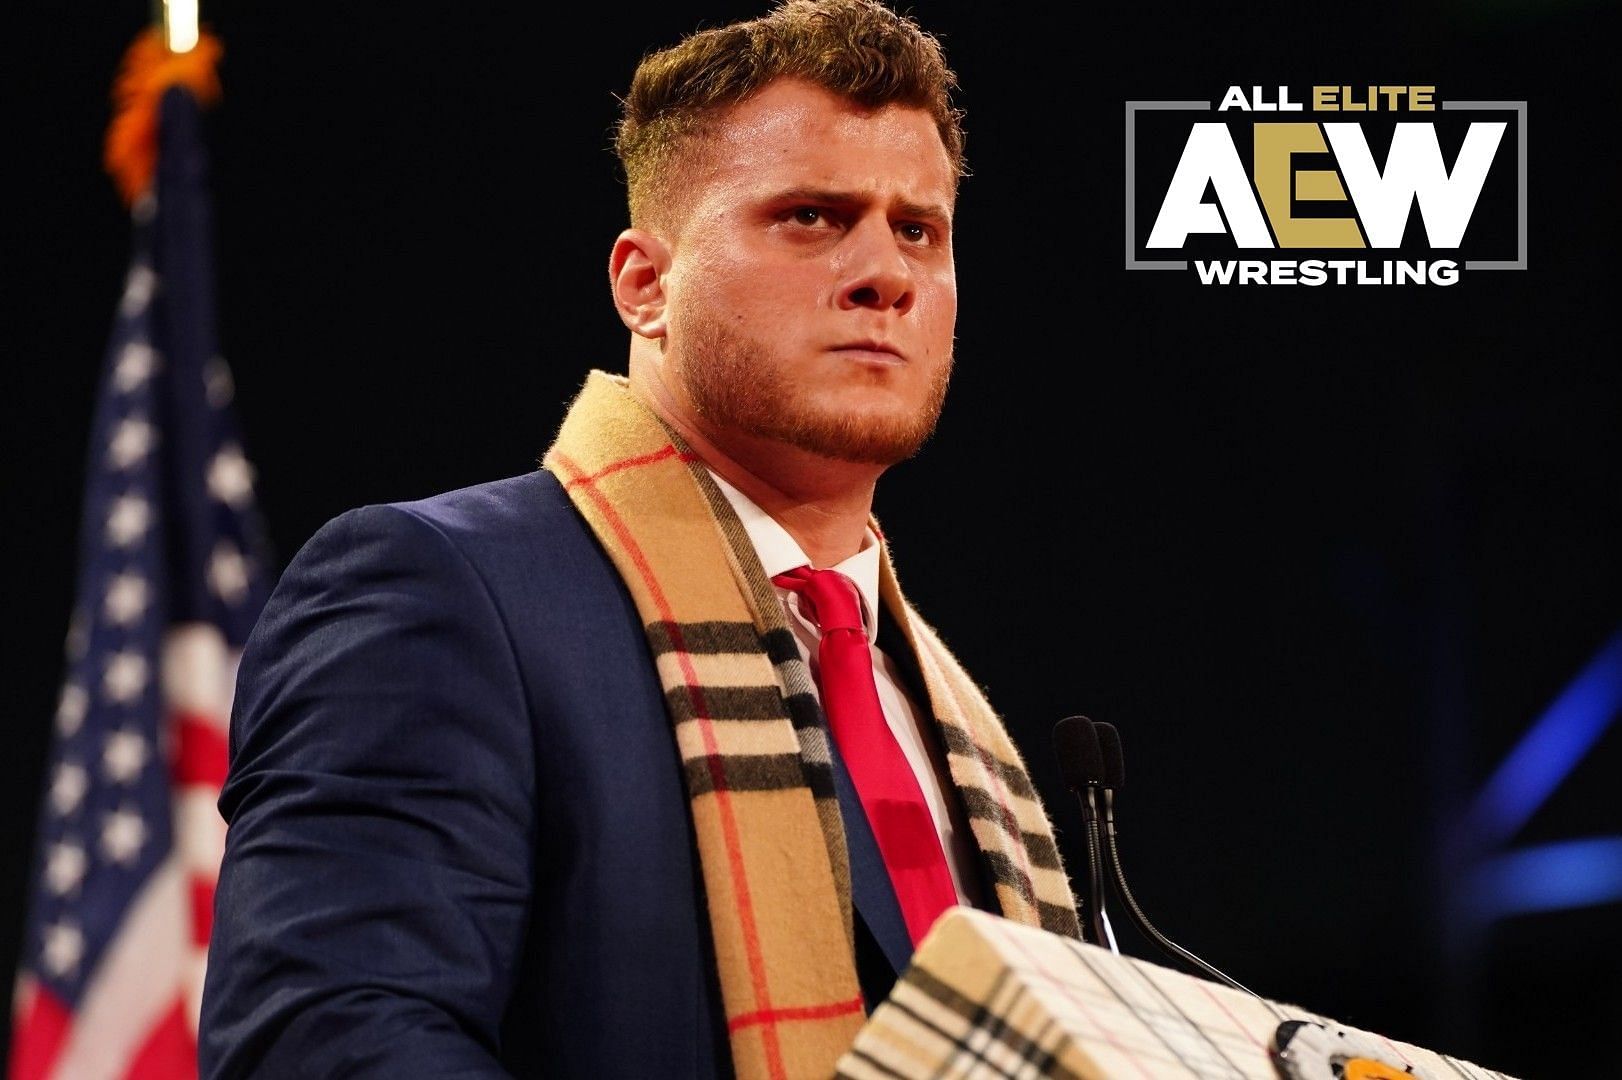 MJF is currently signed to AEW